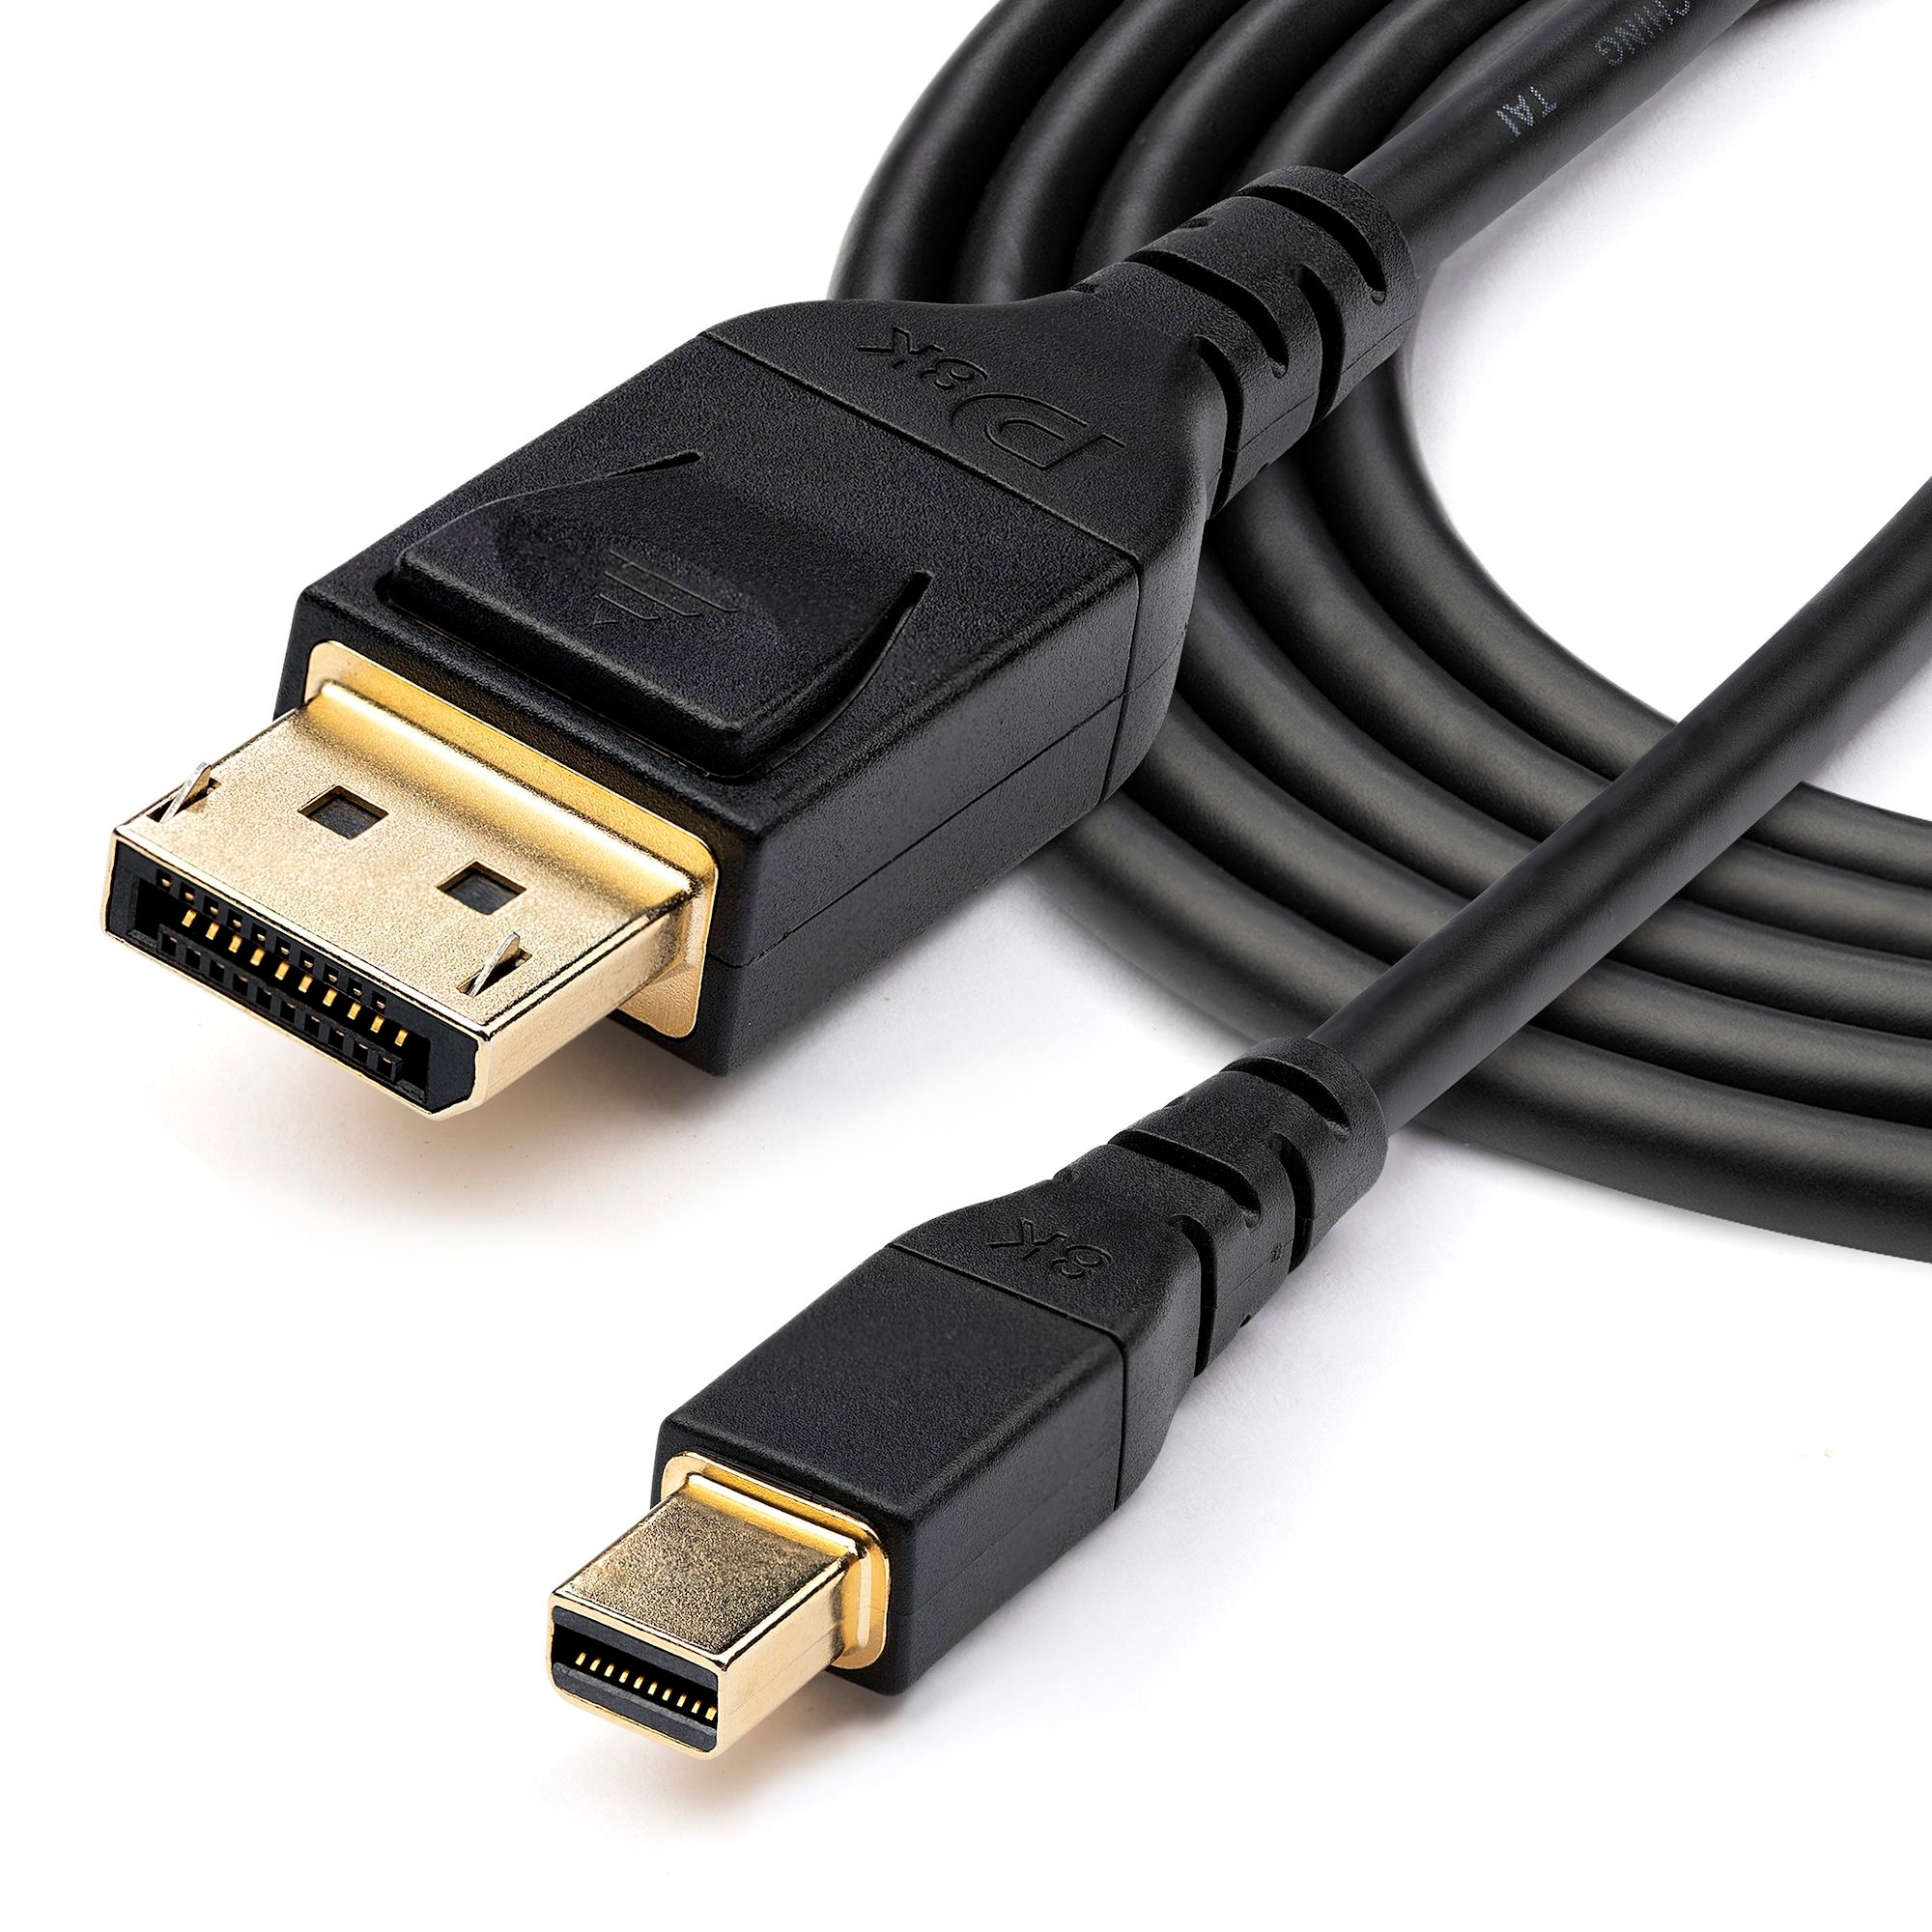 StarTech.com 10ft (3m) DisplayPort to HDMI Cable - 4K 30Hz - DisplayPort to  HDMI Adapter Cable - DP 1.2 to HDMI Monitor Cable Converter - Latching DP